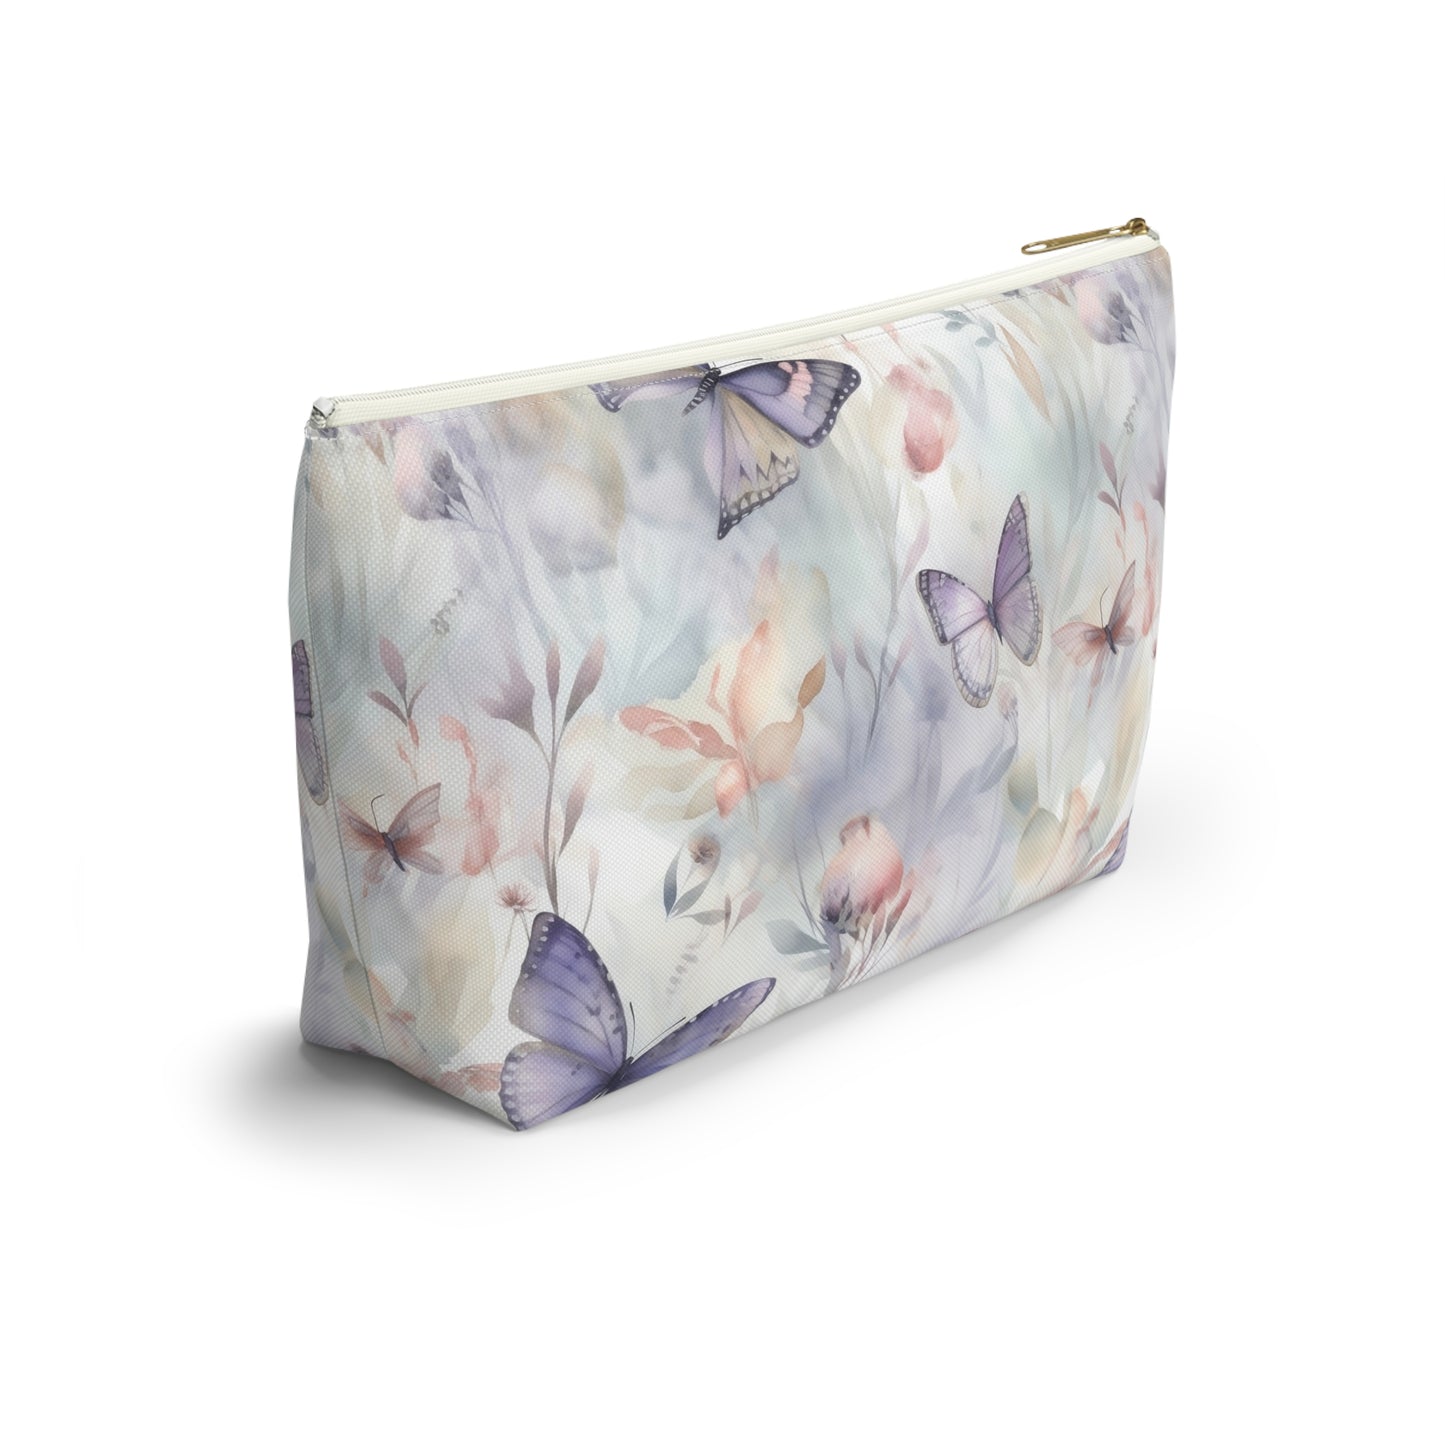 Butterfly Makeup Bag / Personalized Cosmetic Bag